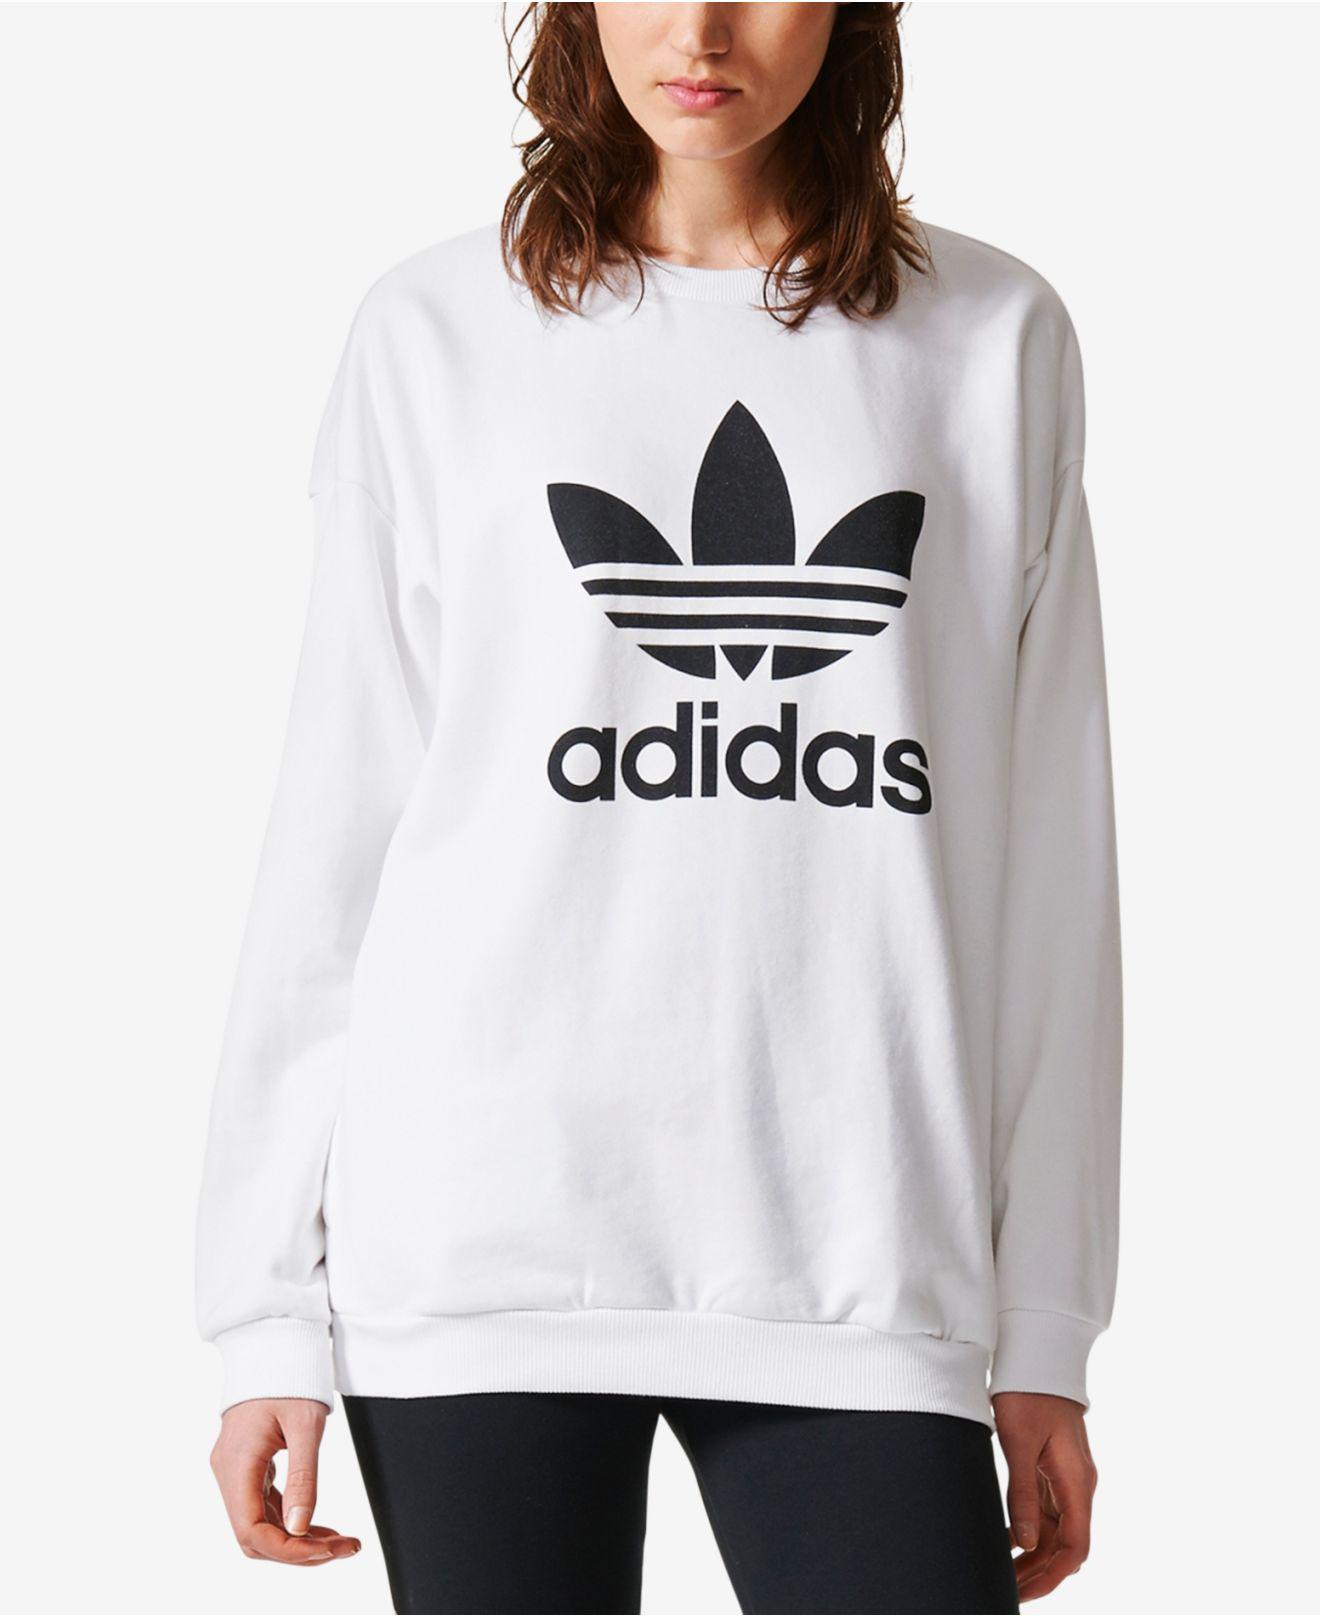 adidas Cotton Relaxed Logo Sweatshirt in White - Lyst